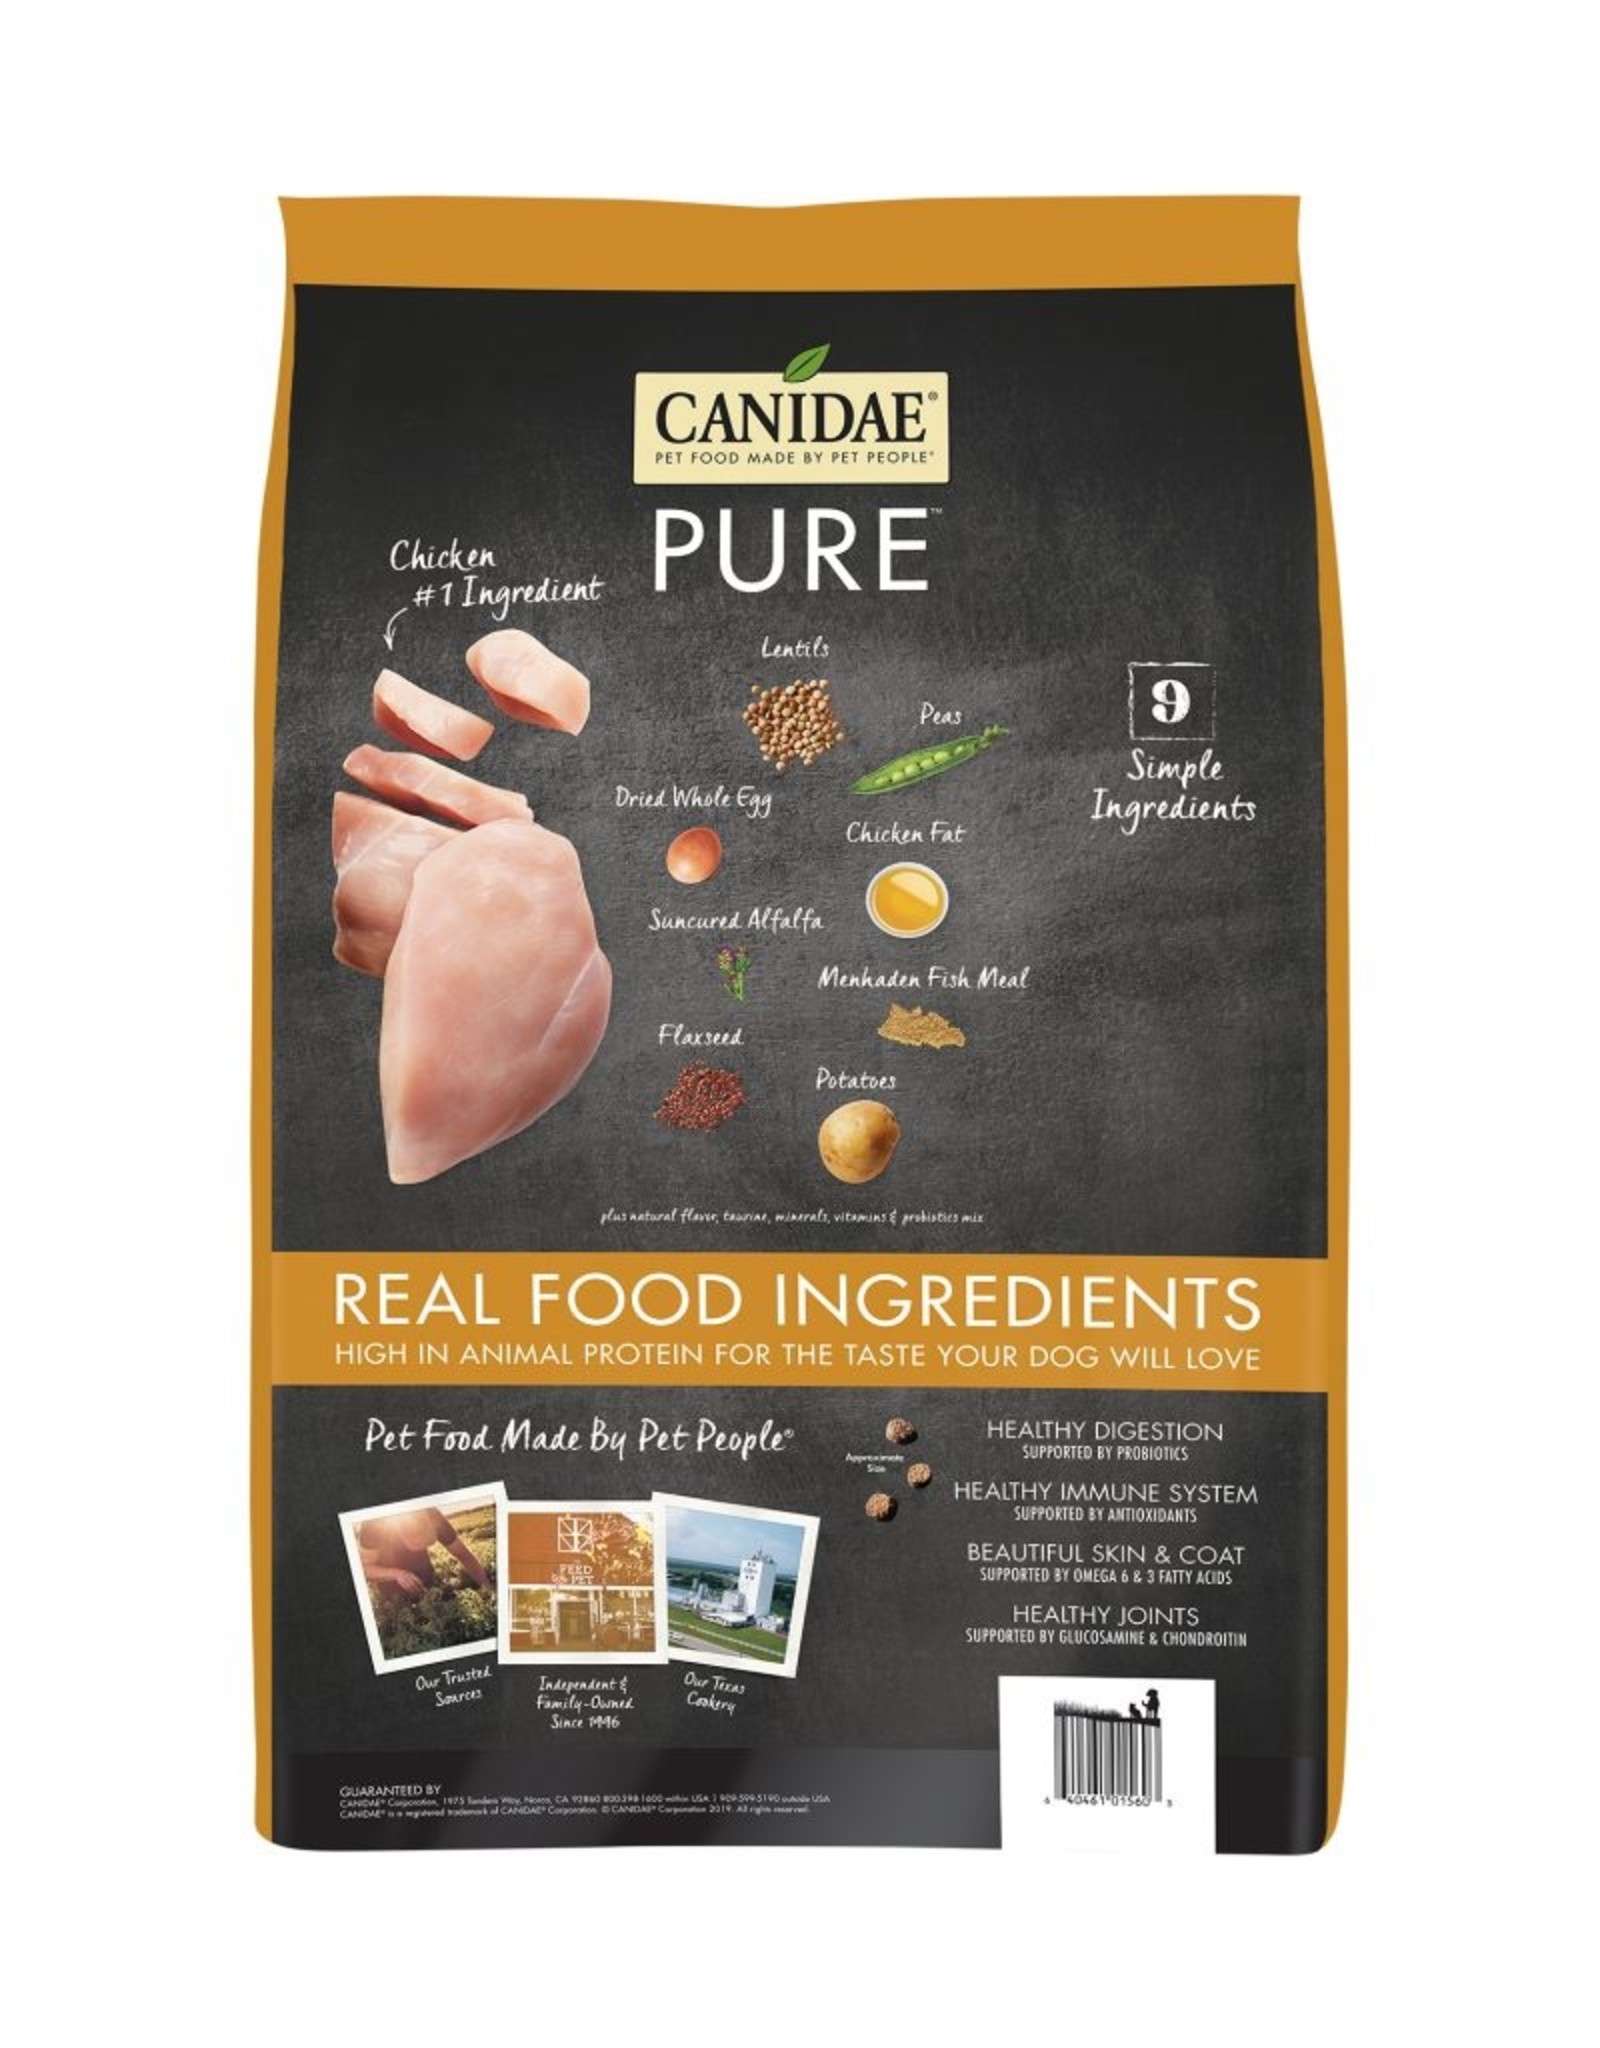 CANIDAE PET FOODS CANIDAE PUPPY GRAIN FREE PURE CHICKEN 12LBS